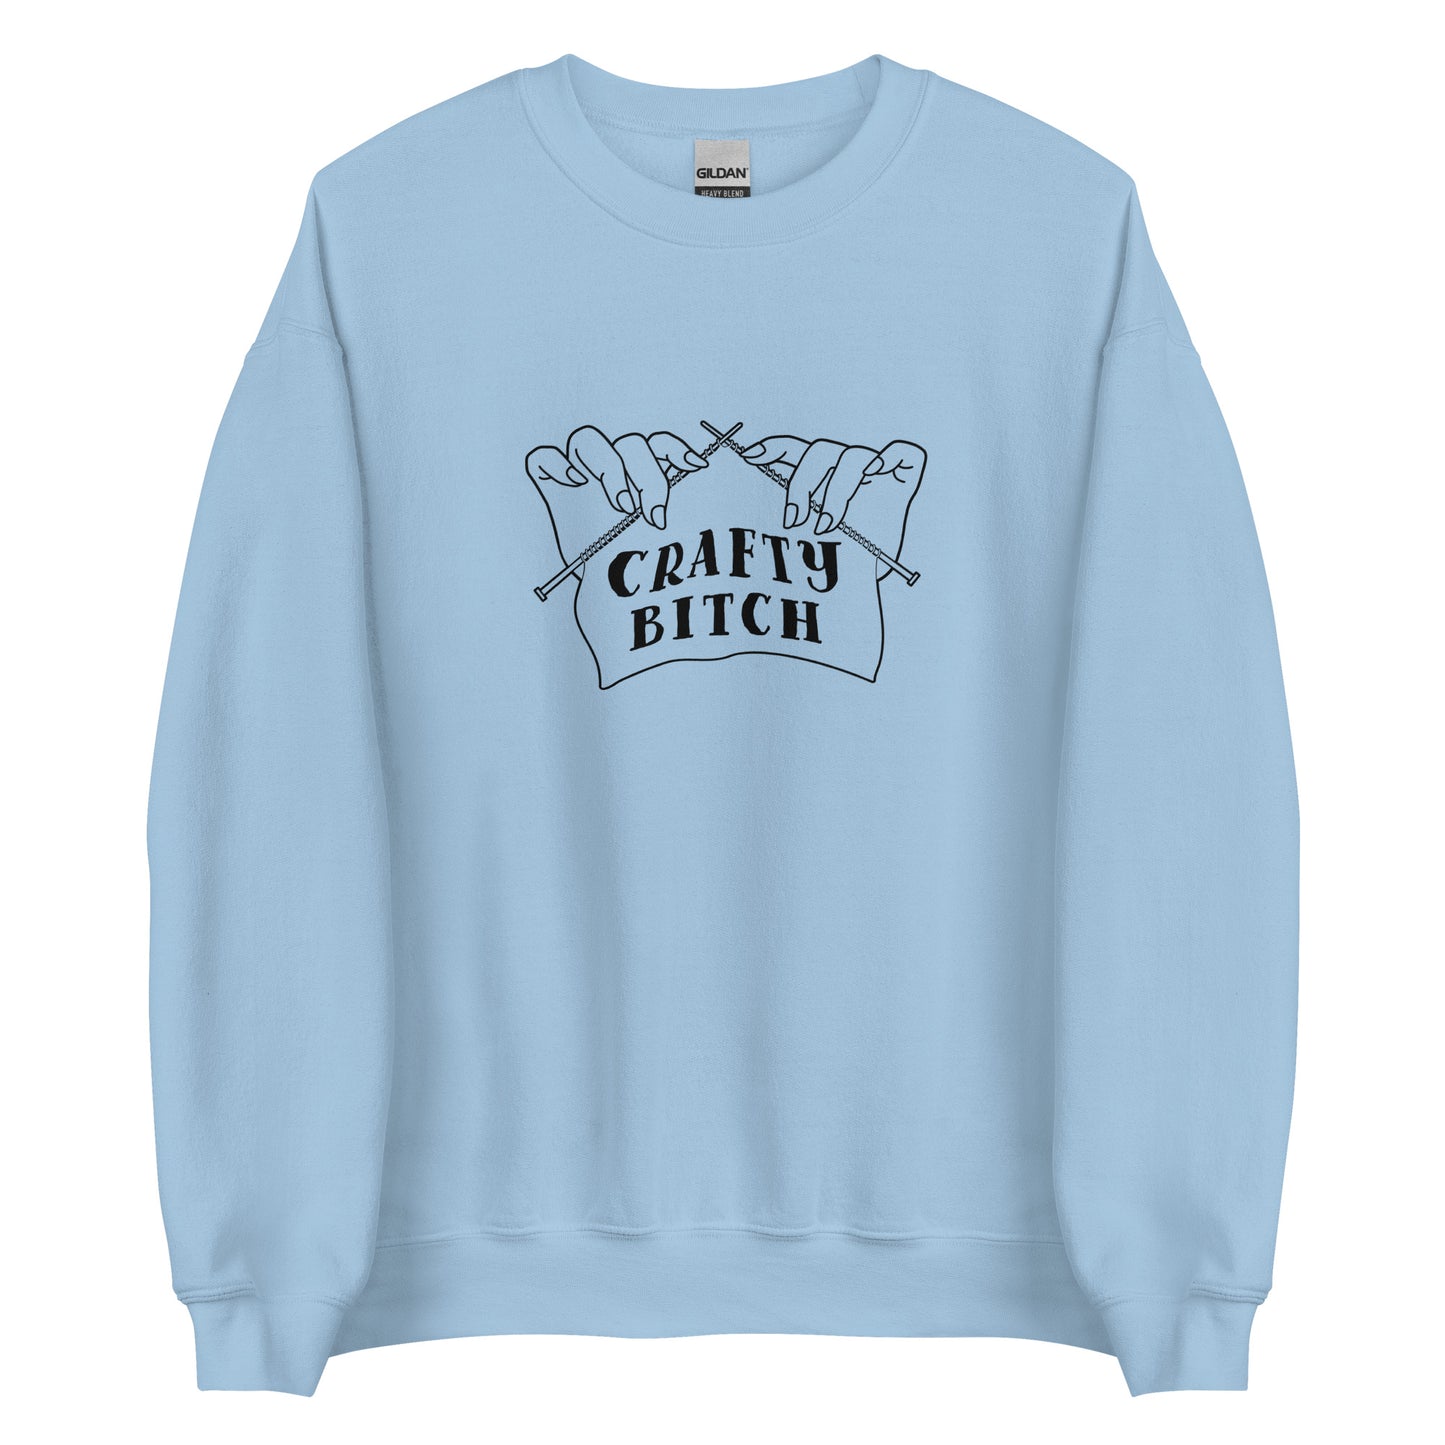 A light blue crewneck sweatshirt featuring a single-color illustration of a pair of hands holding knitting needles. Fabric on the needles features text that reads "crafty bitch".